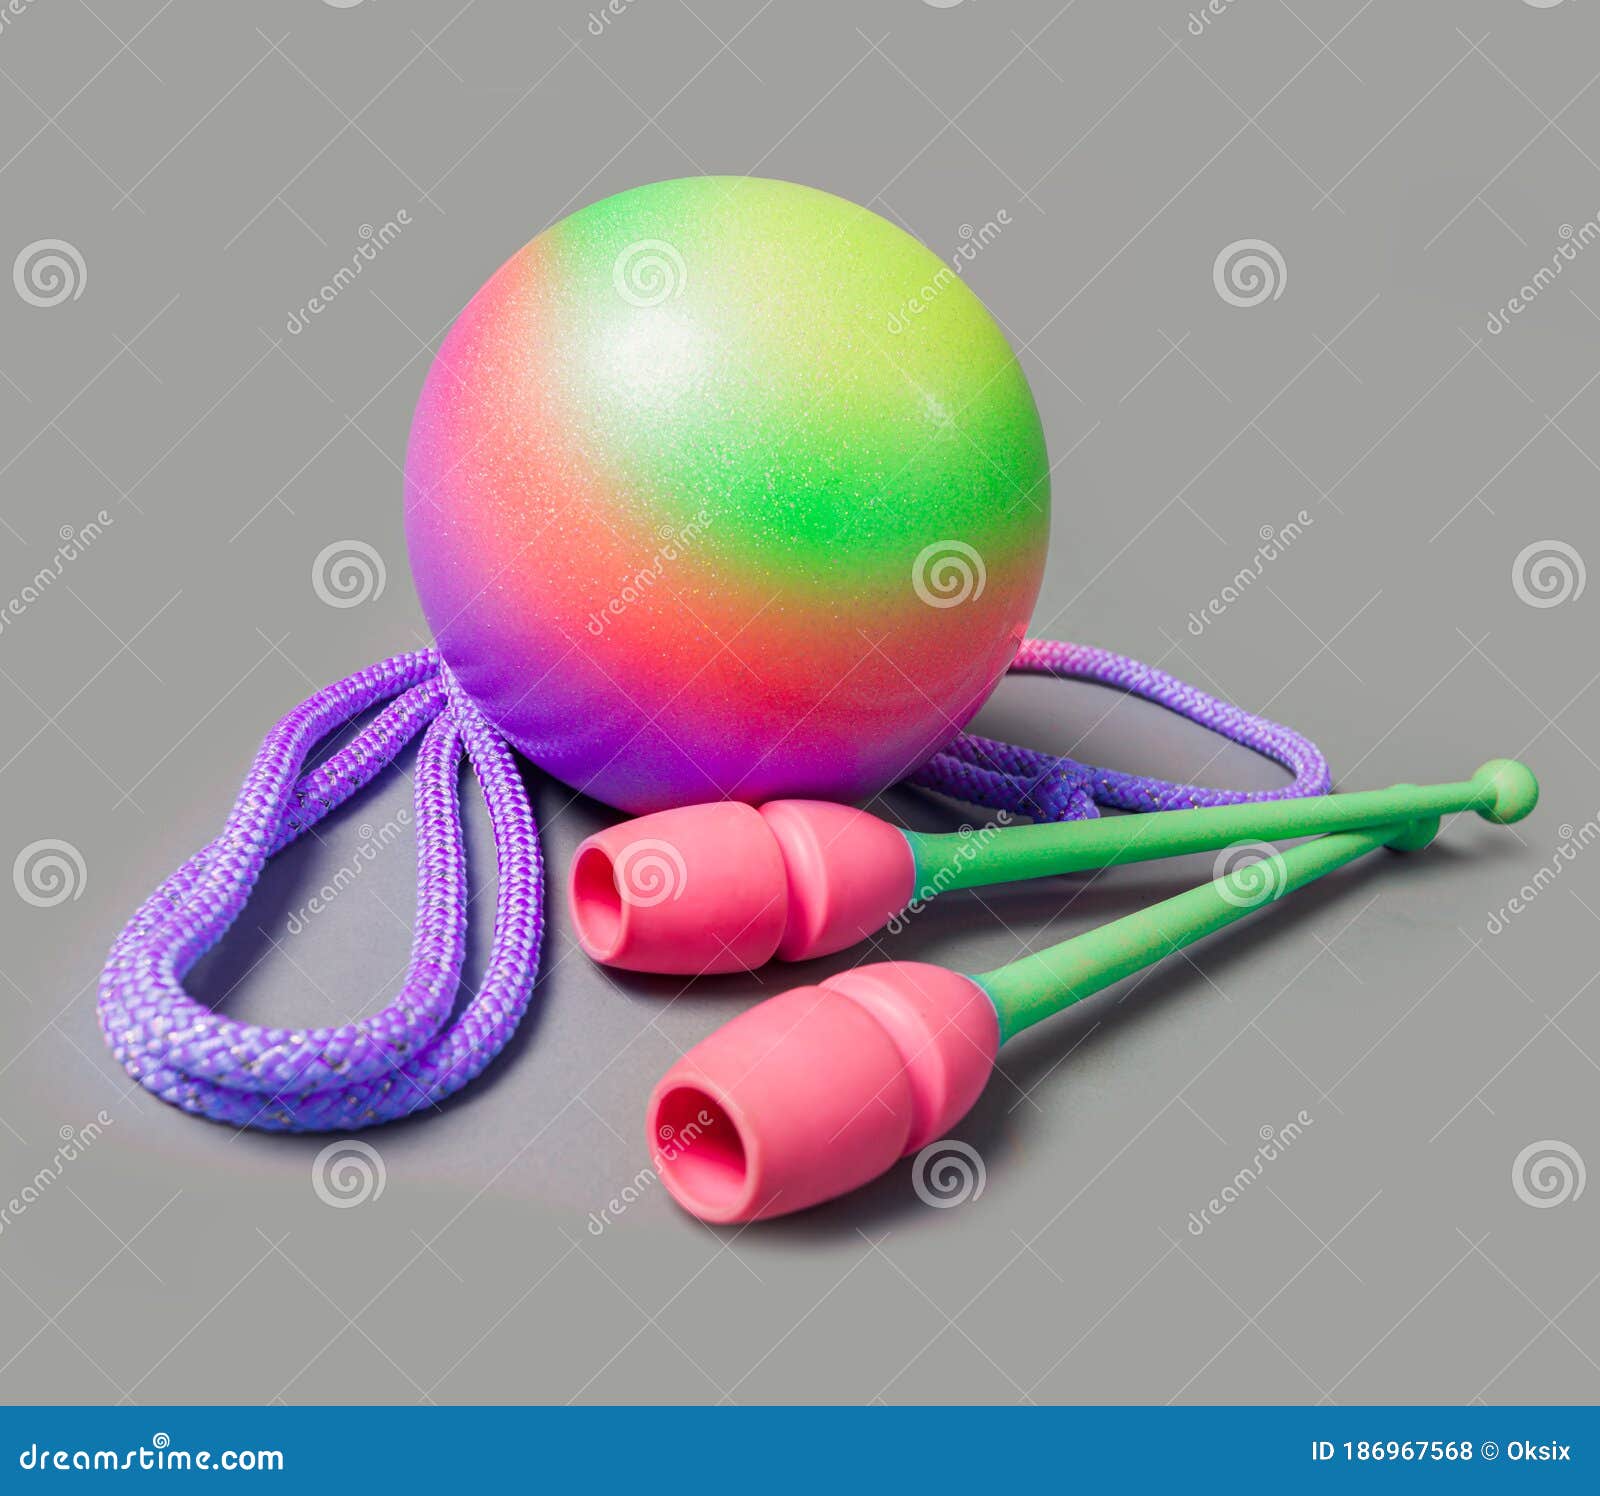 Rhythmic Gymnastics Equipment on Grey Background. Green Ball, Mace and Rope  for Gymnastics Stock Photo - Image of isolated, lifestyle: 186967568